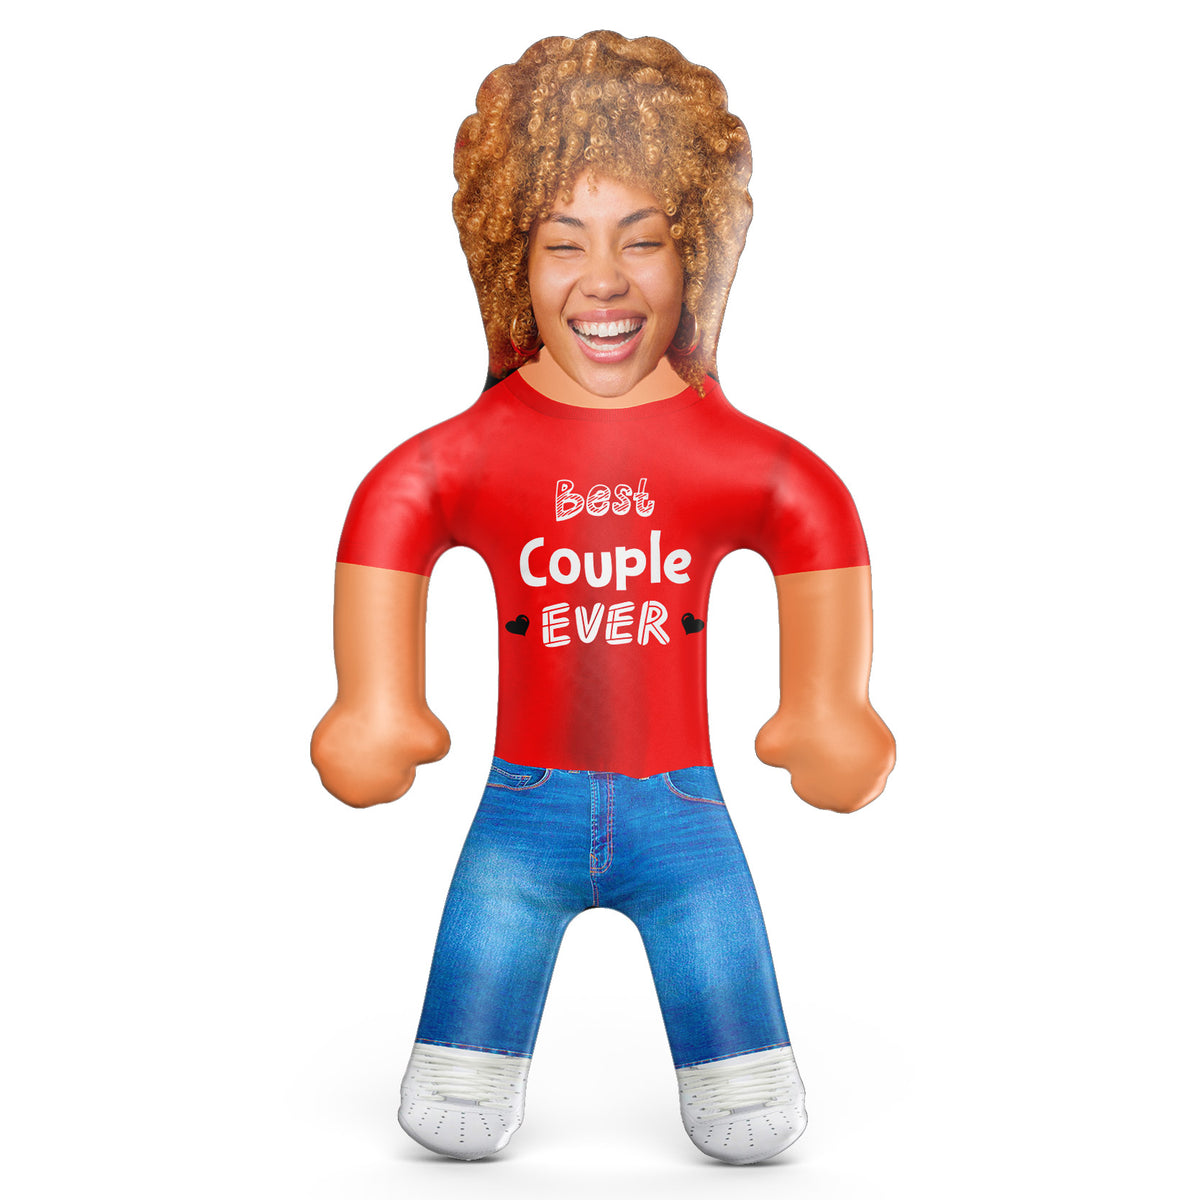 Best Couple Ever Inflatable Doll - Best Couple Ever Blow Up Doll